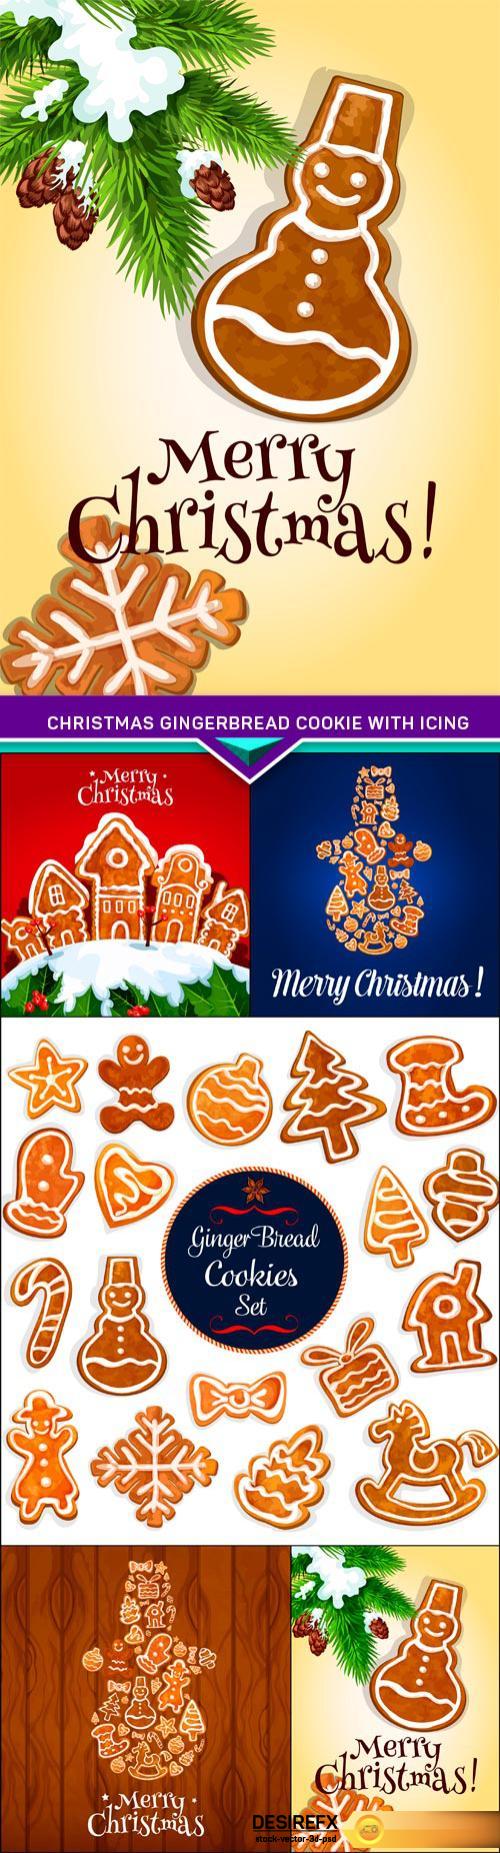 Christmas gingerbread cookie with icing 5X EPS